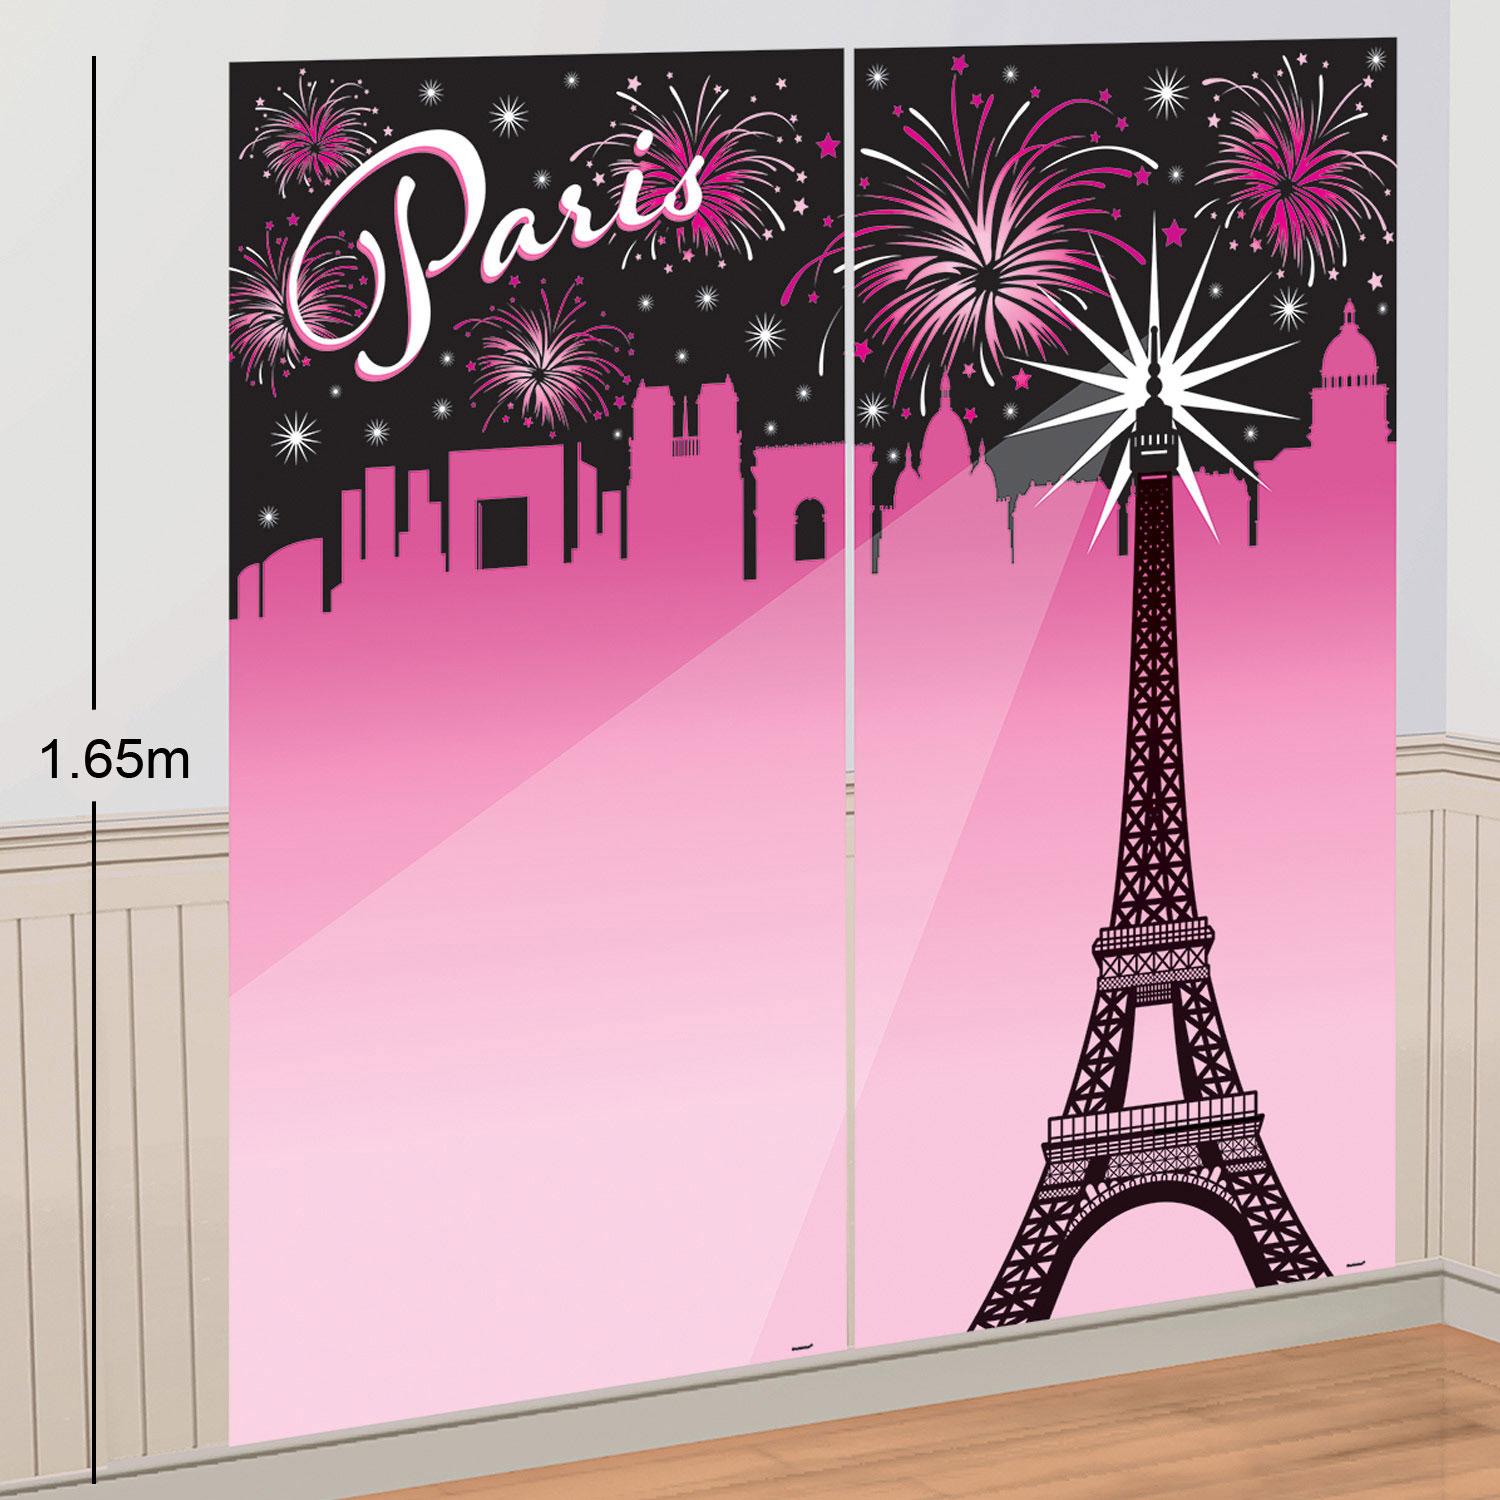 Day in Paris Photgraphic Background Decoration 1.65m x 1.65m by Amscan 670612 available here at Karnival Costumes online party shop